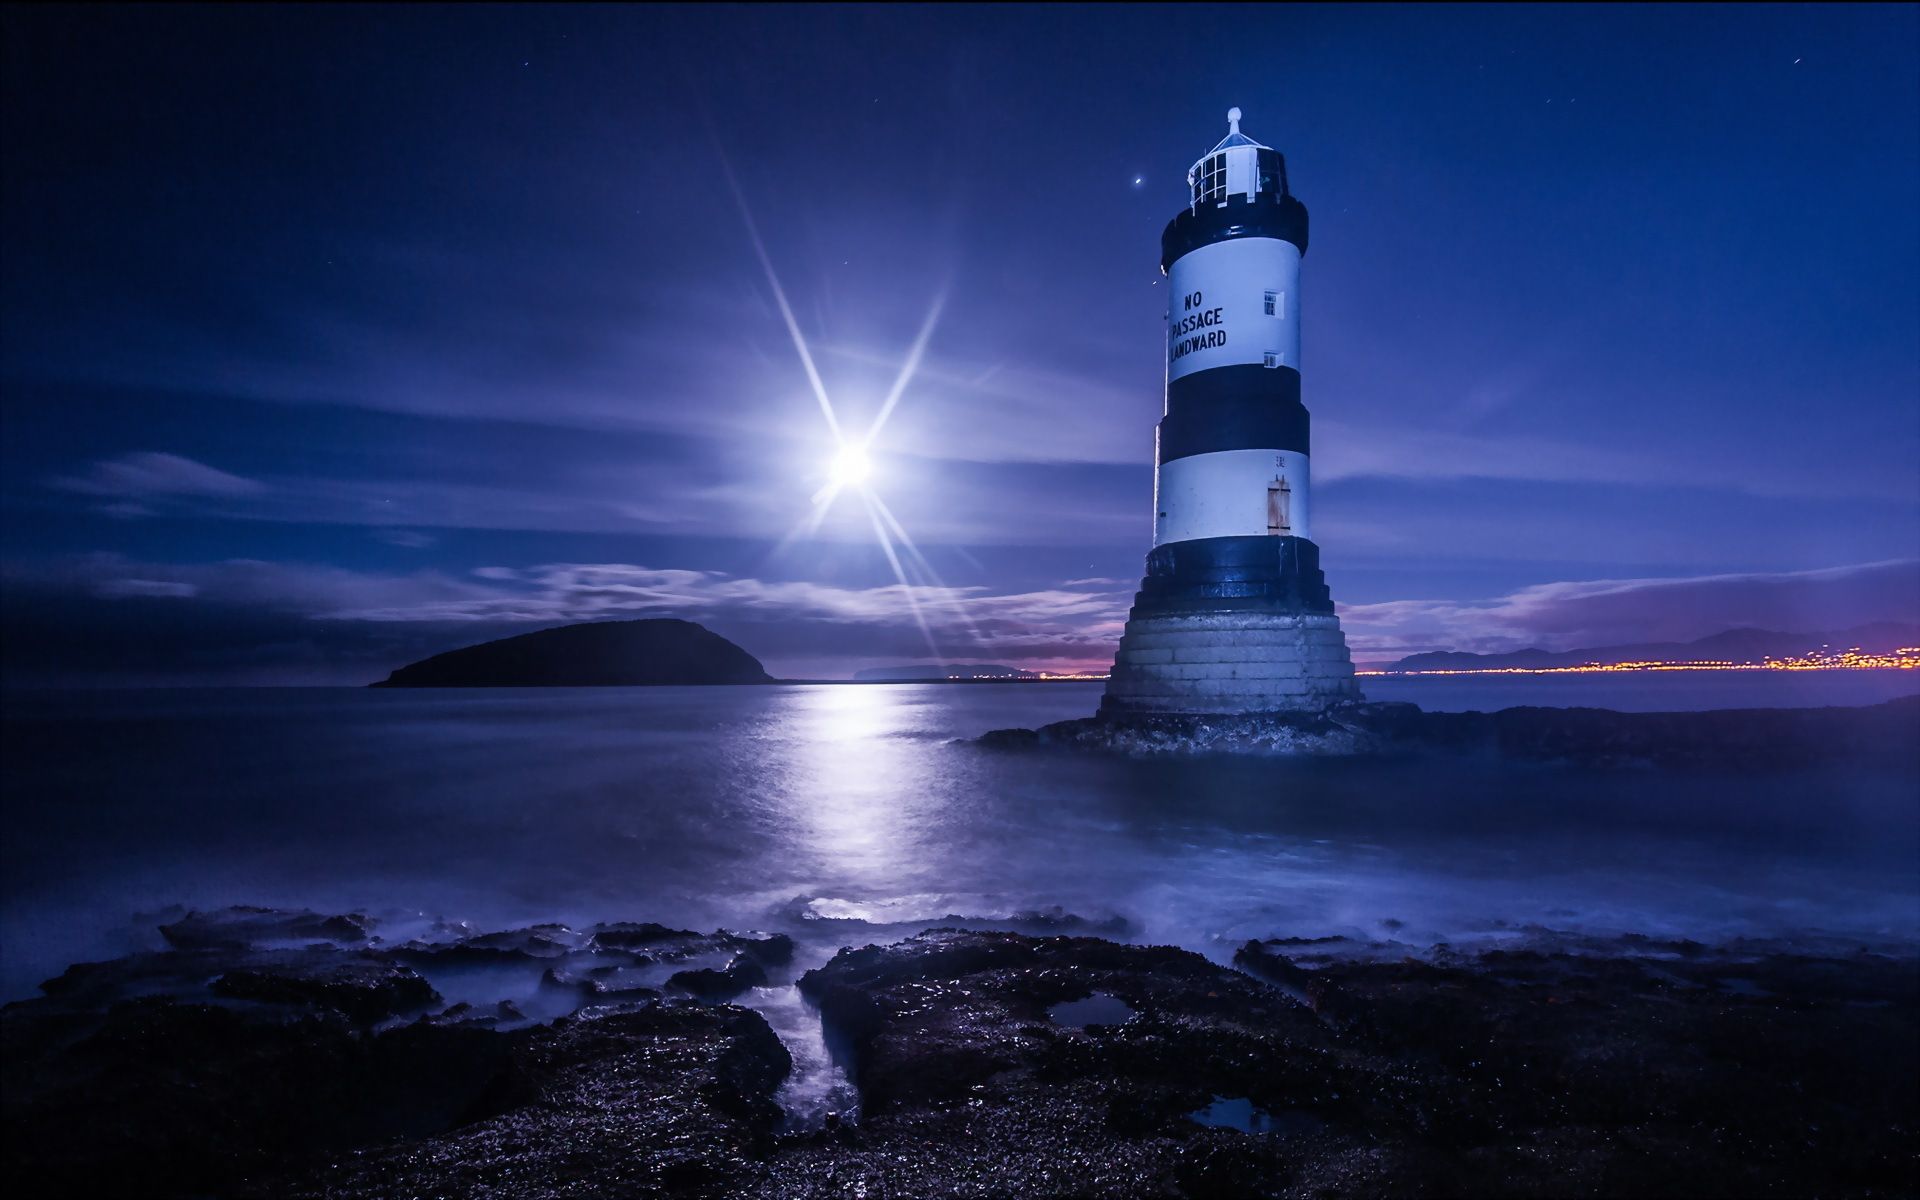 Nice image of the sea, desktop wallpaper of the lighthouse, night